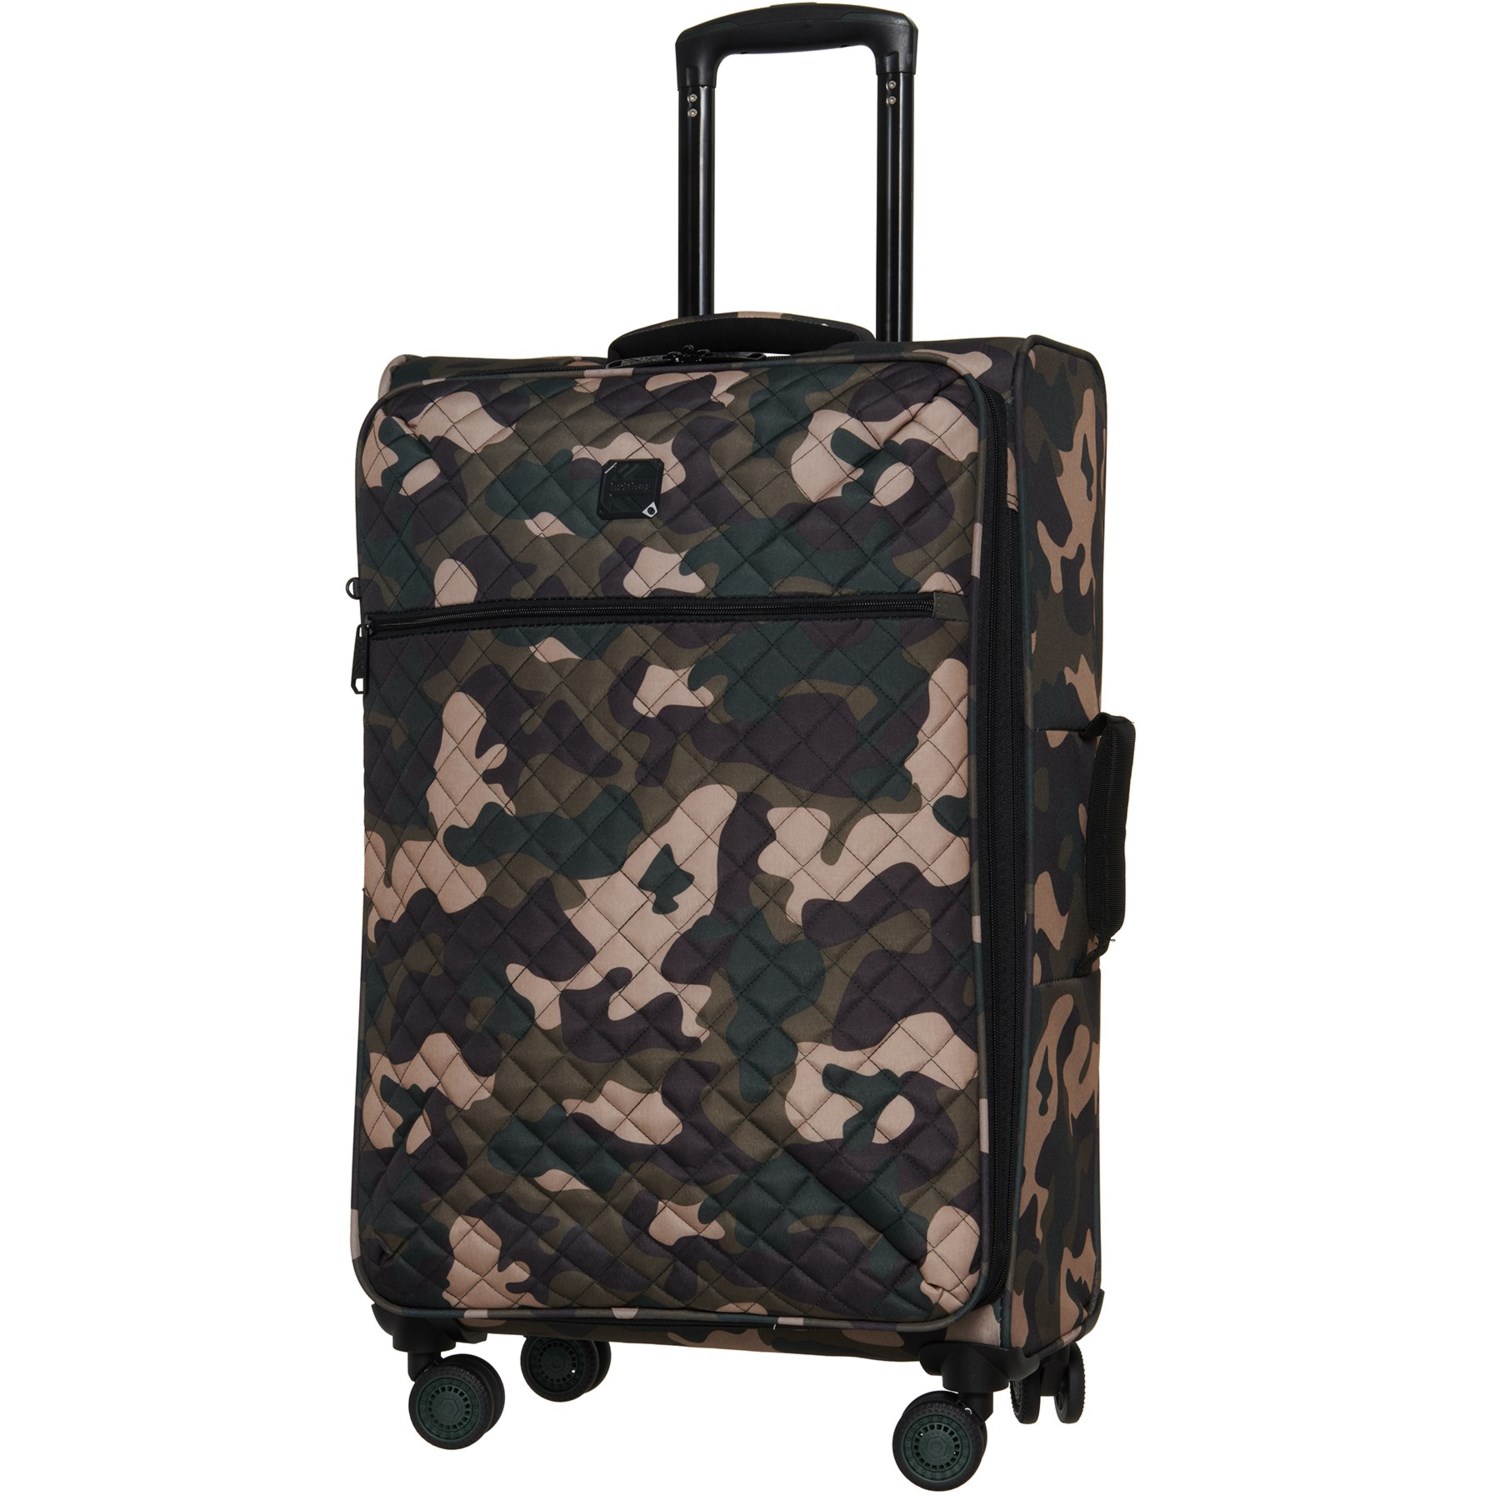 BritBag 28.1” Aberdare Spinner Suitcase - Softside, Expandable, Dark Brown Camo